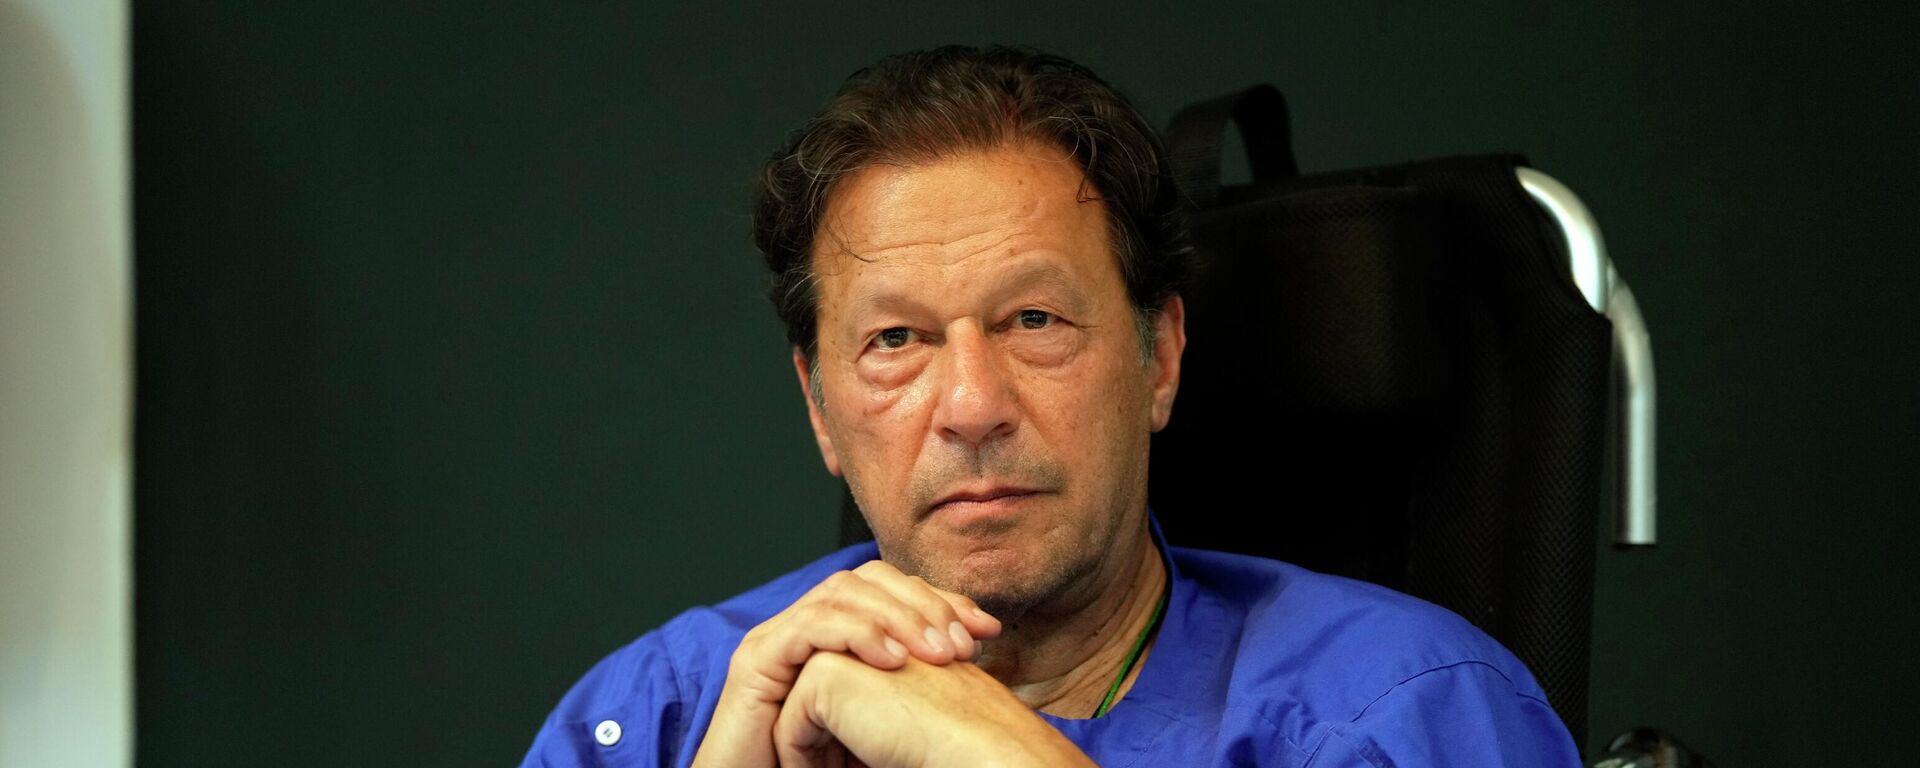 Former Pakistani Prime Minister Imran Khan speaks during a news conference in Shaukat Khanum hospital, where is being treated for a gunshot wound in Lahore, Pakistan, on Nov. 4, 2022. - Sputnik International, 1920, 05.08.2023